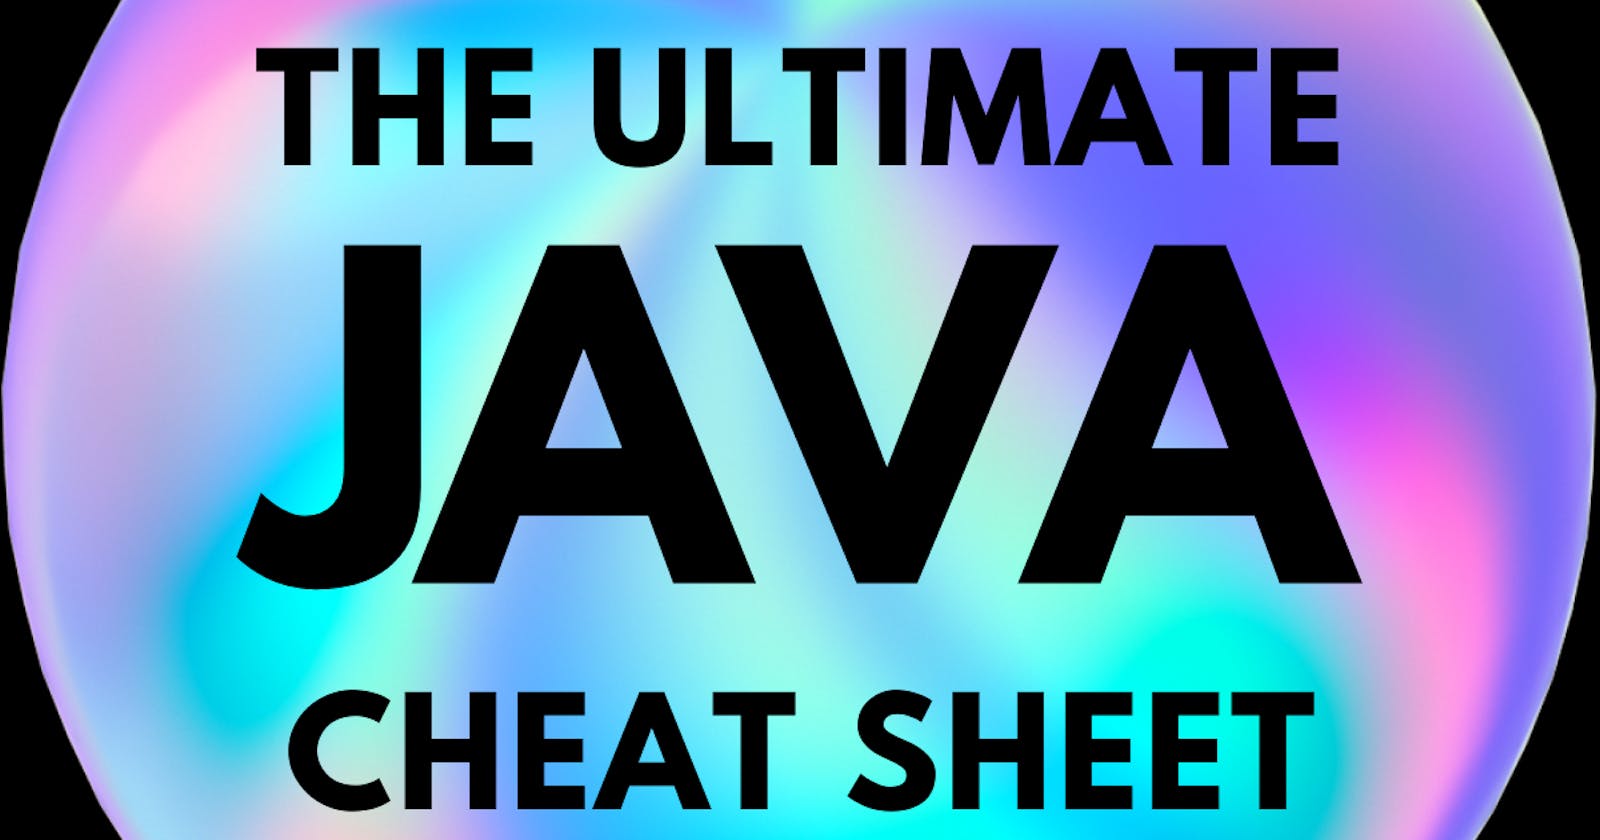 The Ultimate Java Cheat Sheet